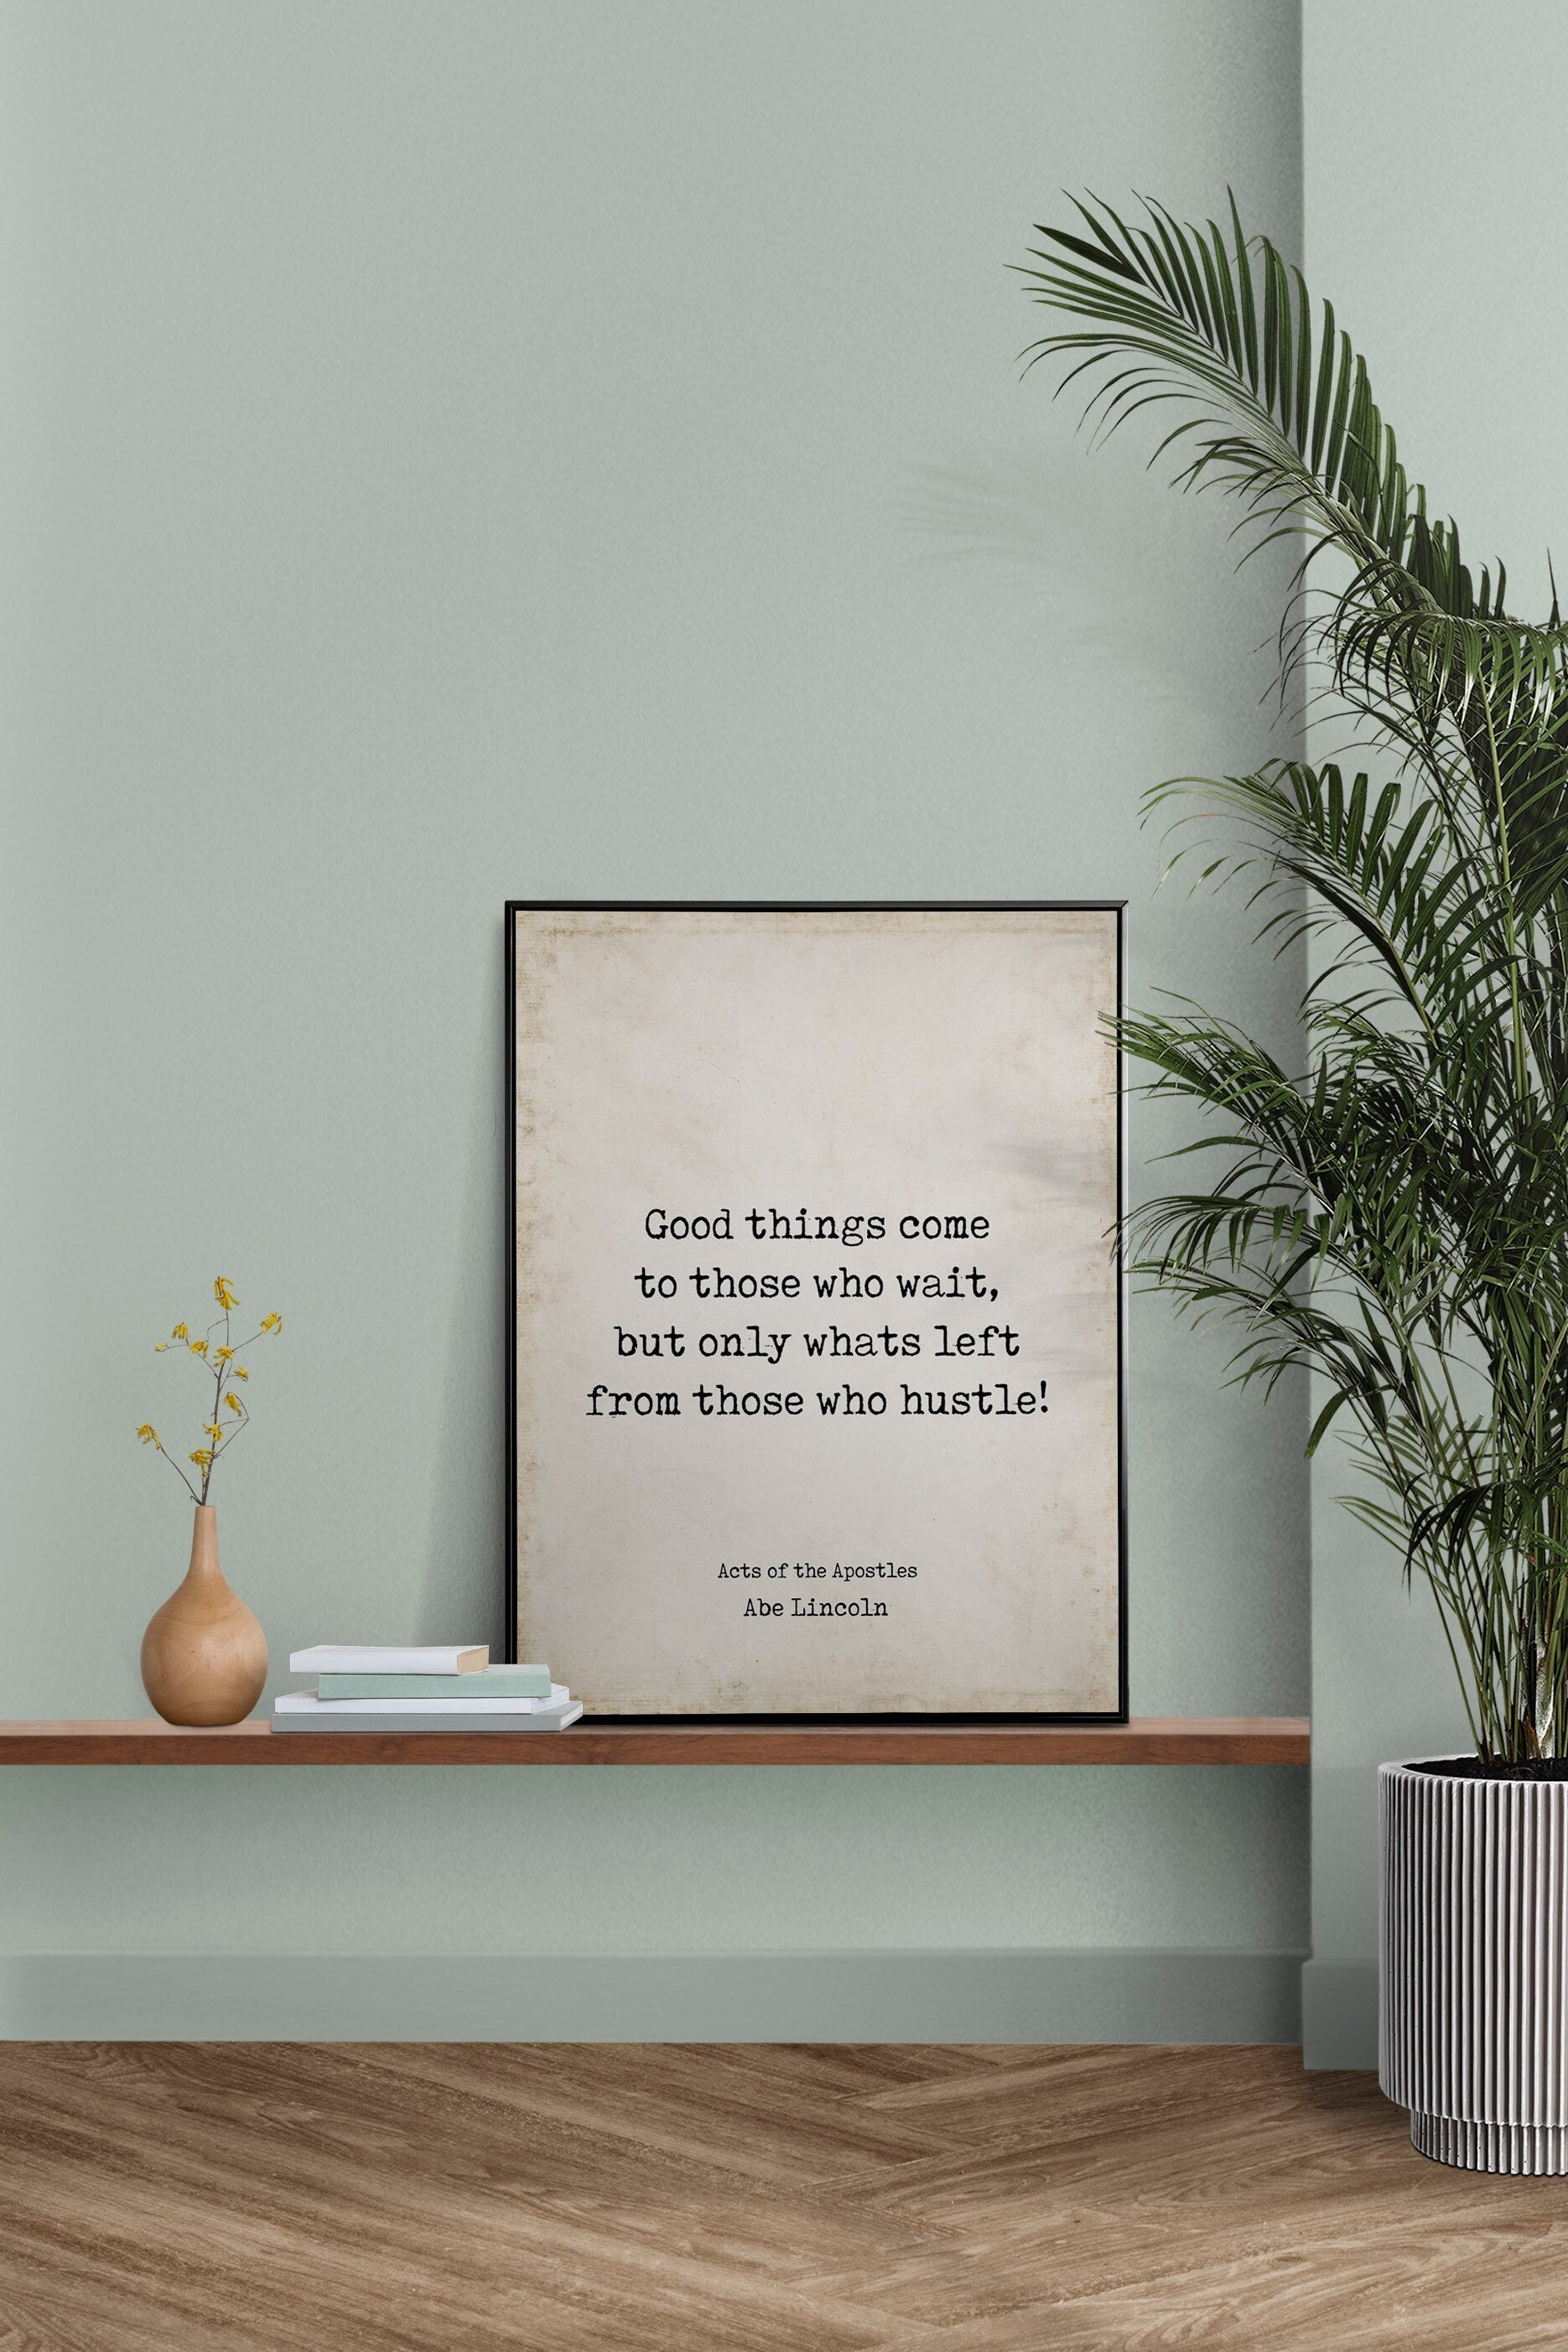 Abraham Lincoln Quote Print, Good Things Come To Those Who Wait, Inspirational Black & White or Vintage Art Decor Unframed or Framed Art